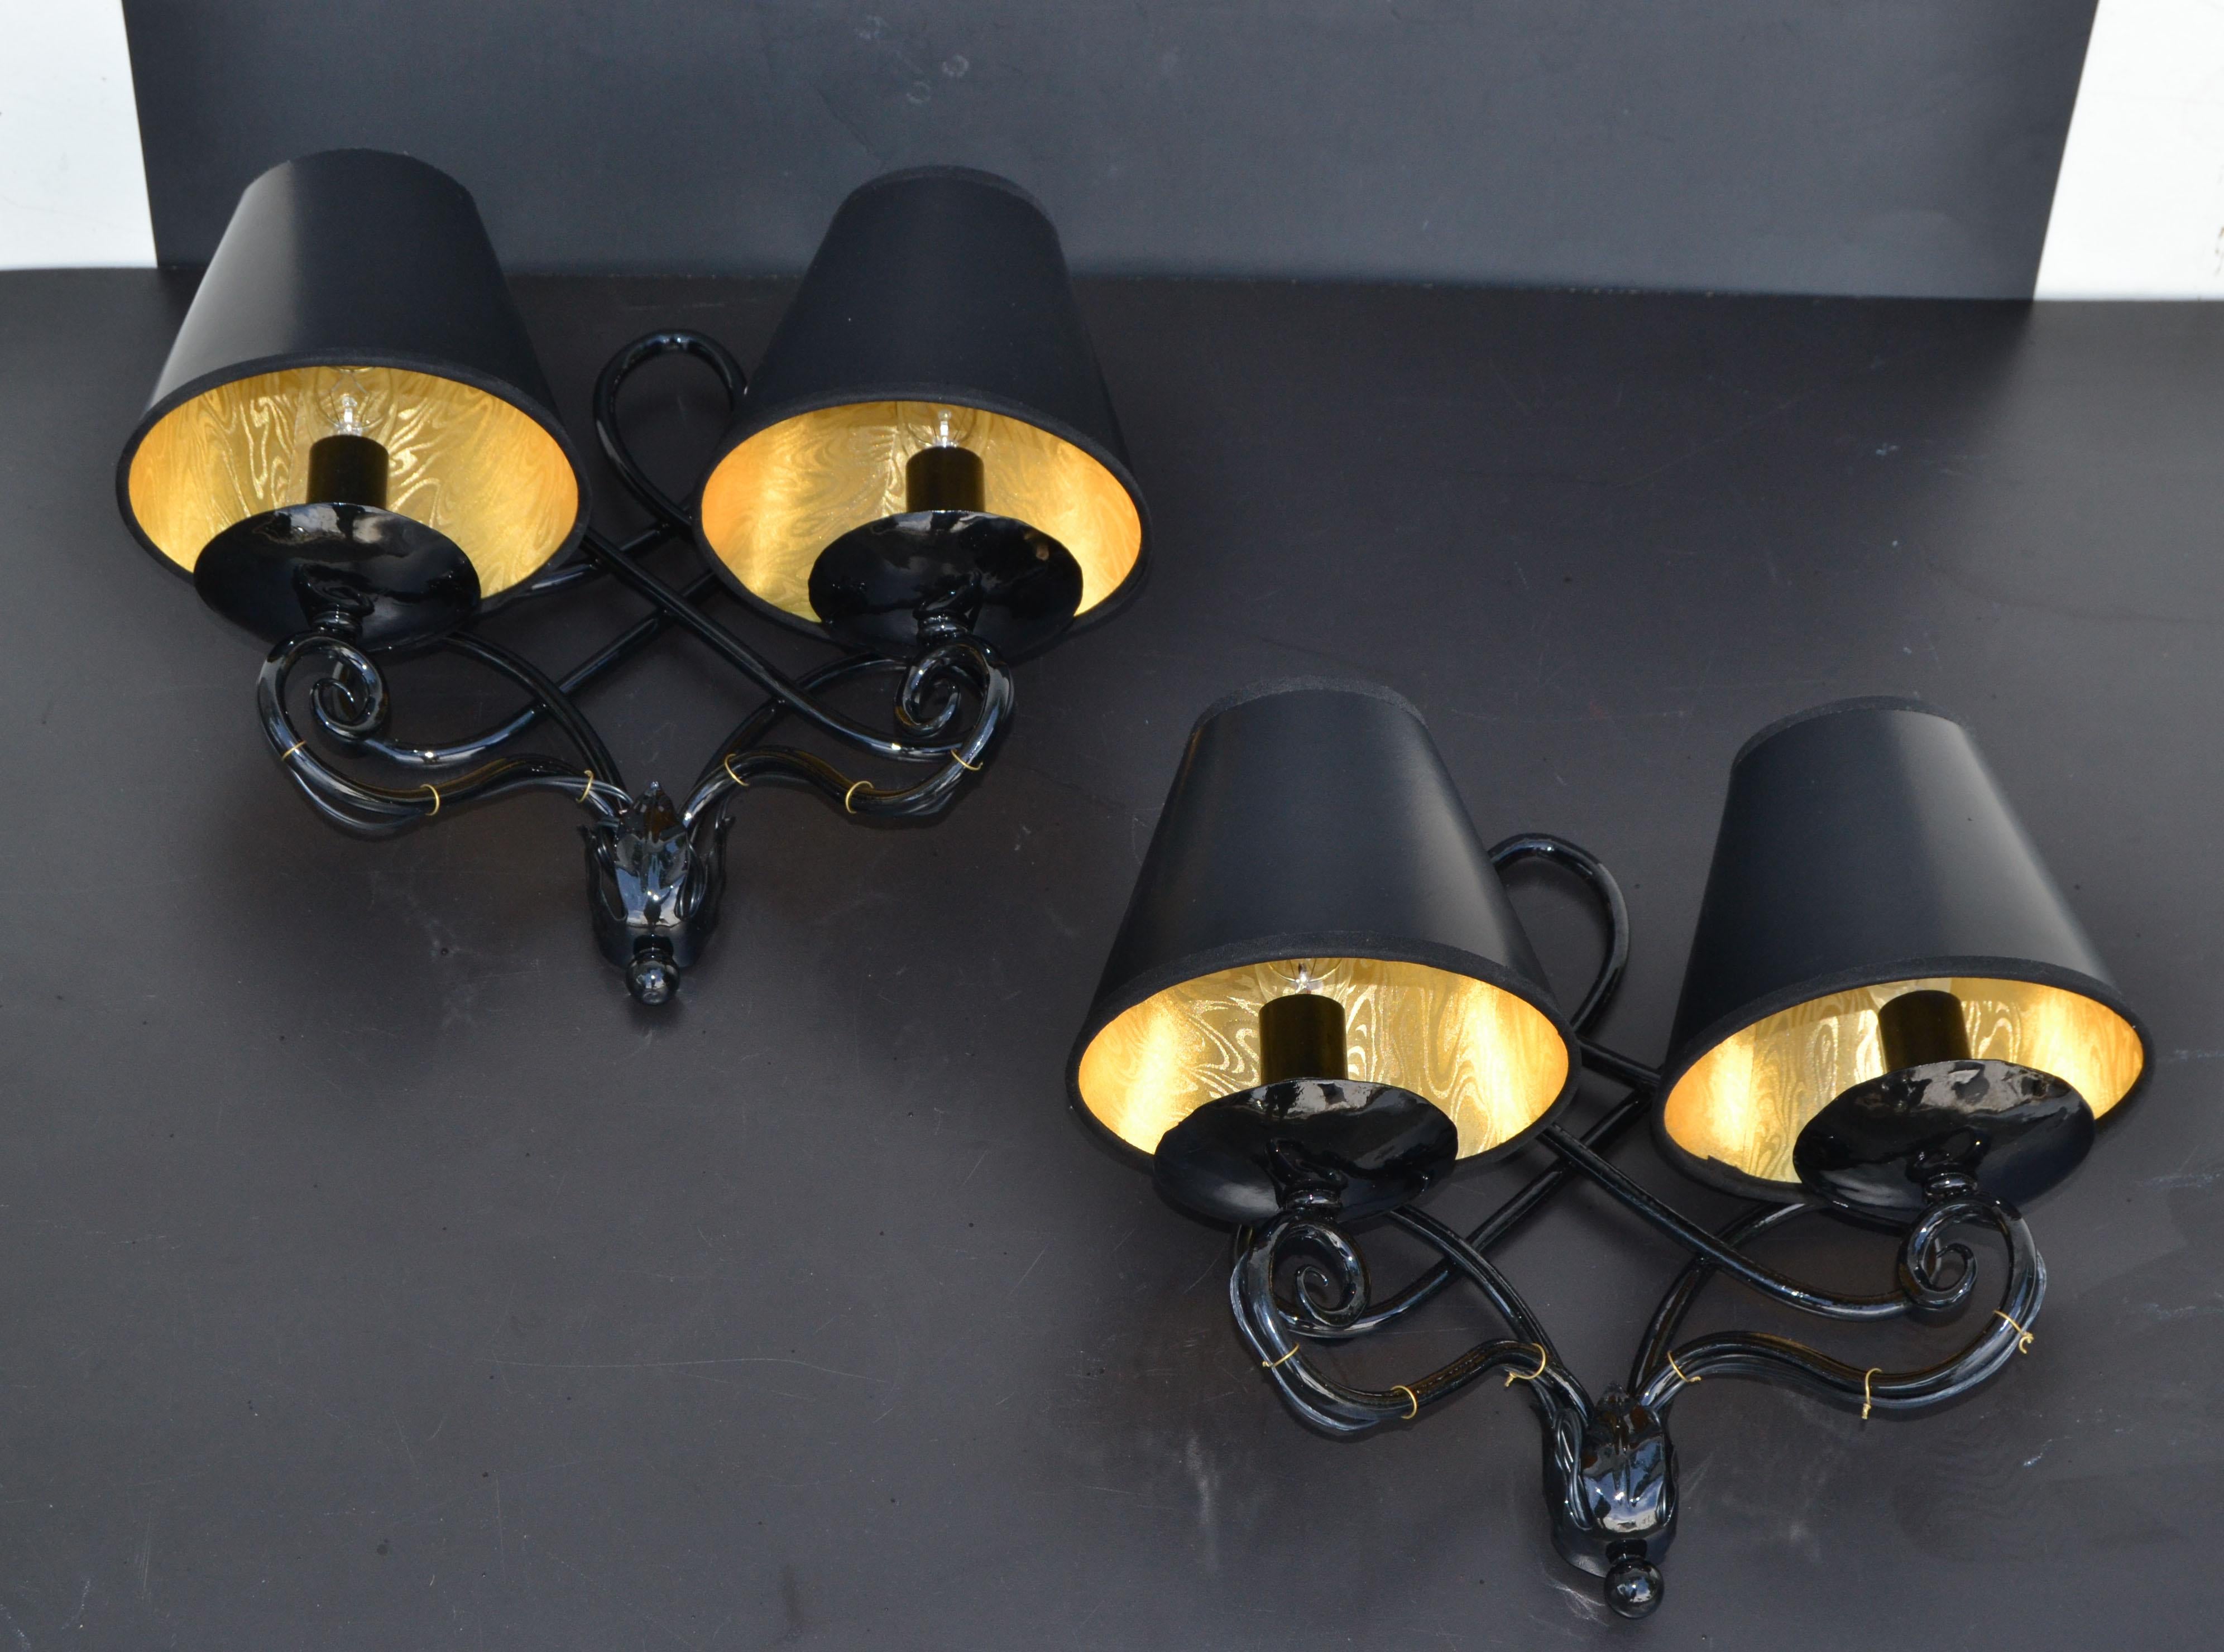 1940 French 2 Lights Wrought Iron Wall Sconces Black Gloss Finish Art Deco, Pair 8